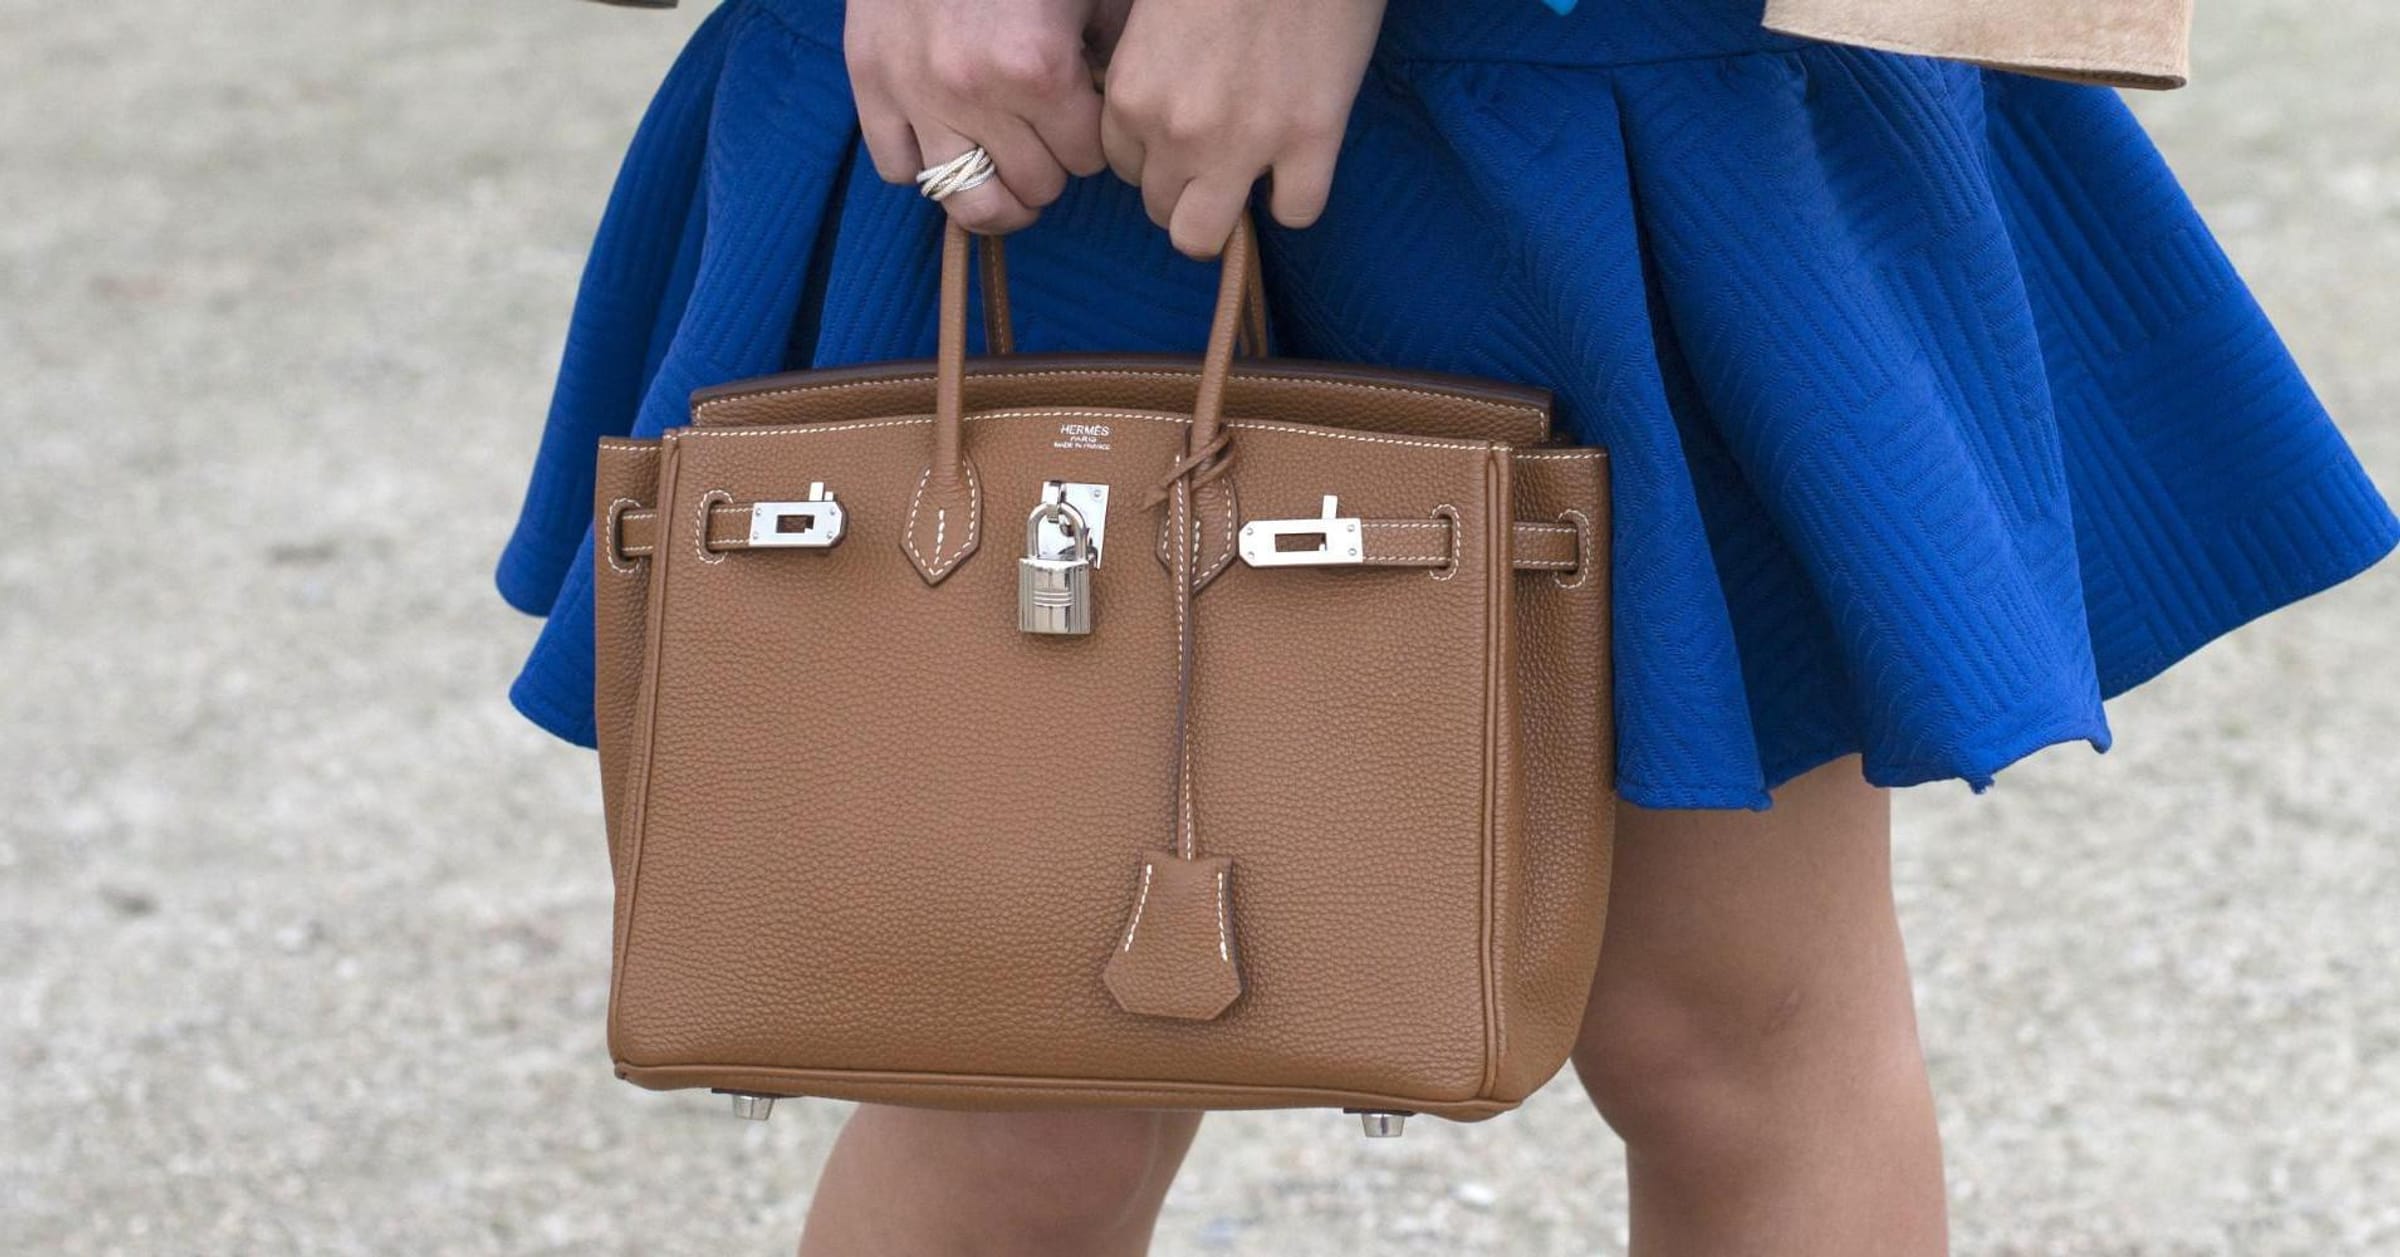 The 19 Most Expensive Purses in the World